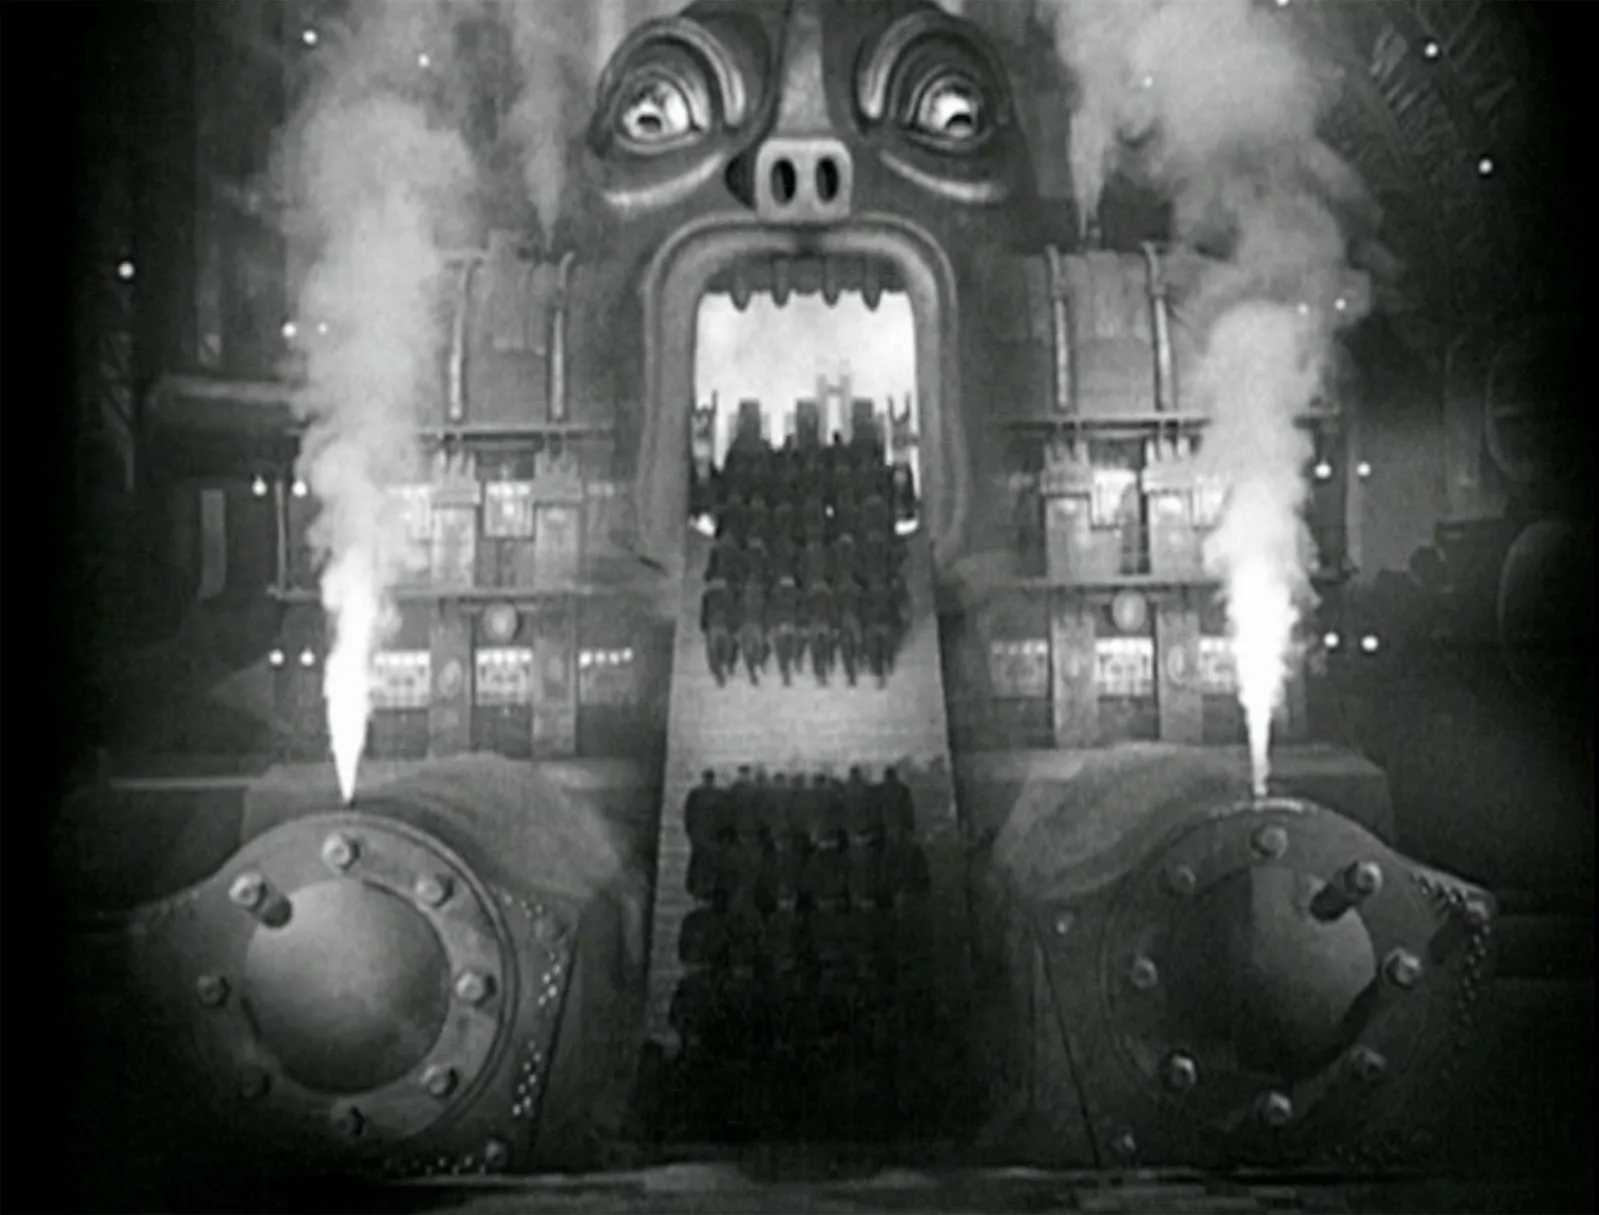 footage from Metropolis
with people climbing the stares
into the mouth of Moloch
a giant machine with glowing eyes
